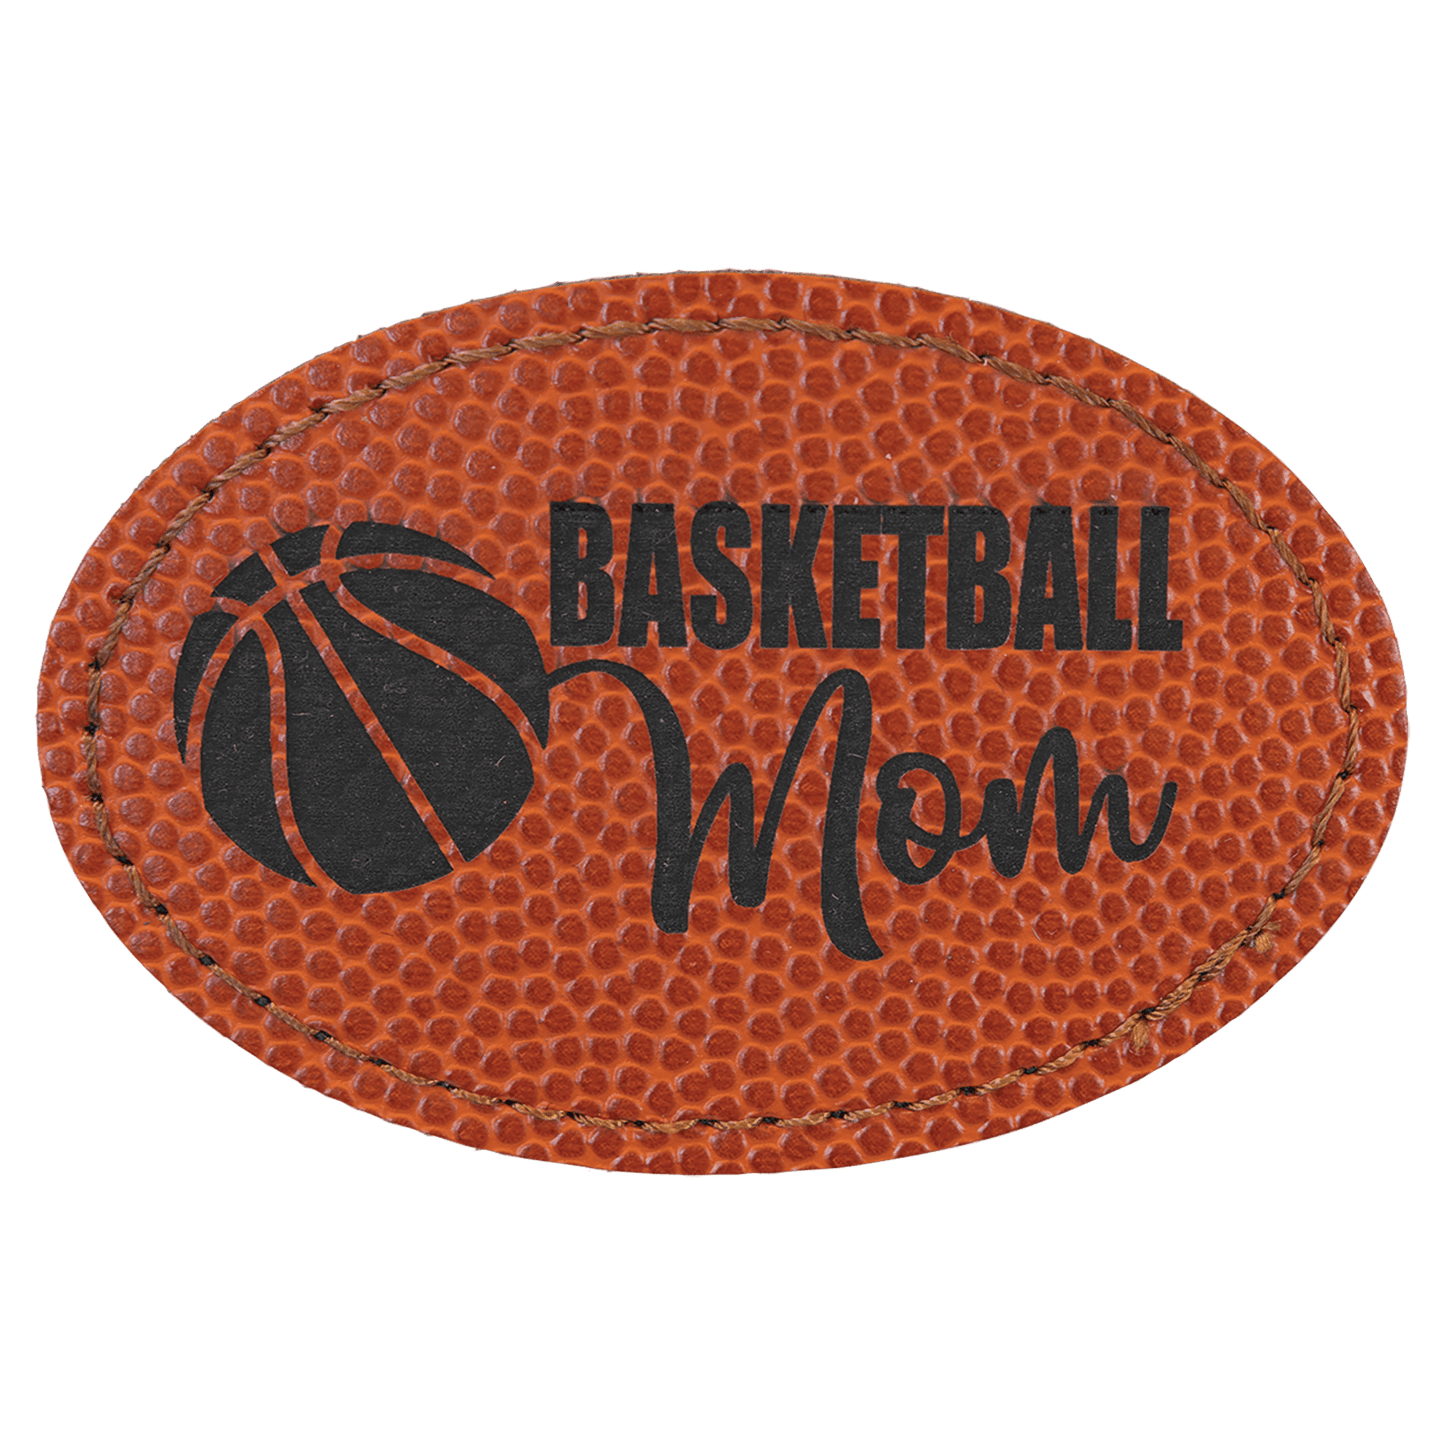 3" x 2" Oval Basketball Laserable Leatherette Patch with Adhesive